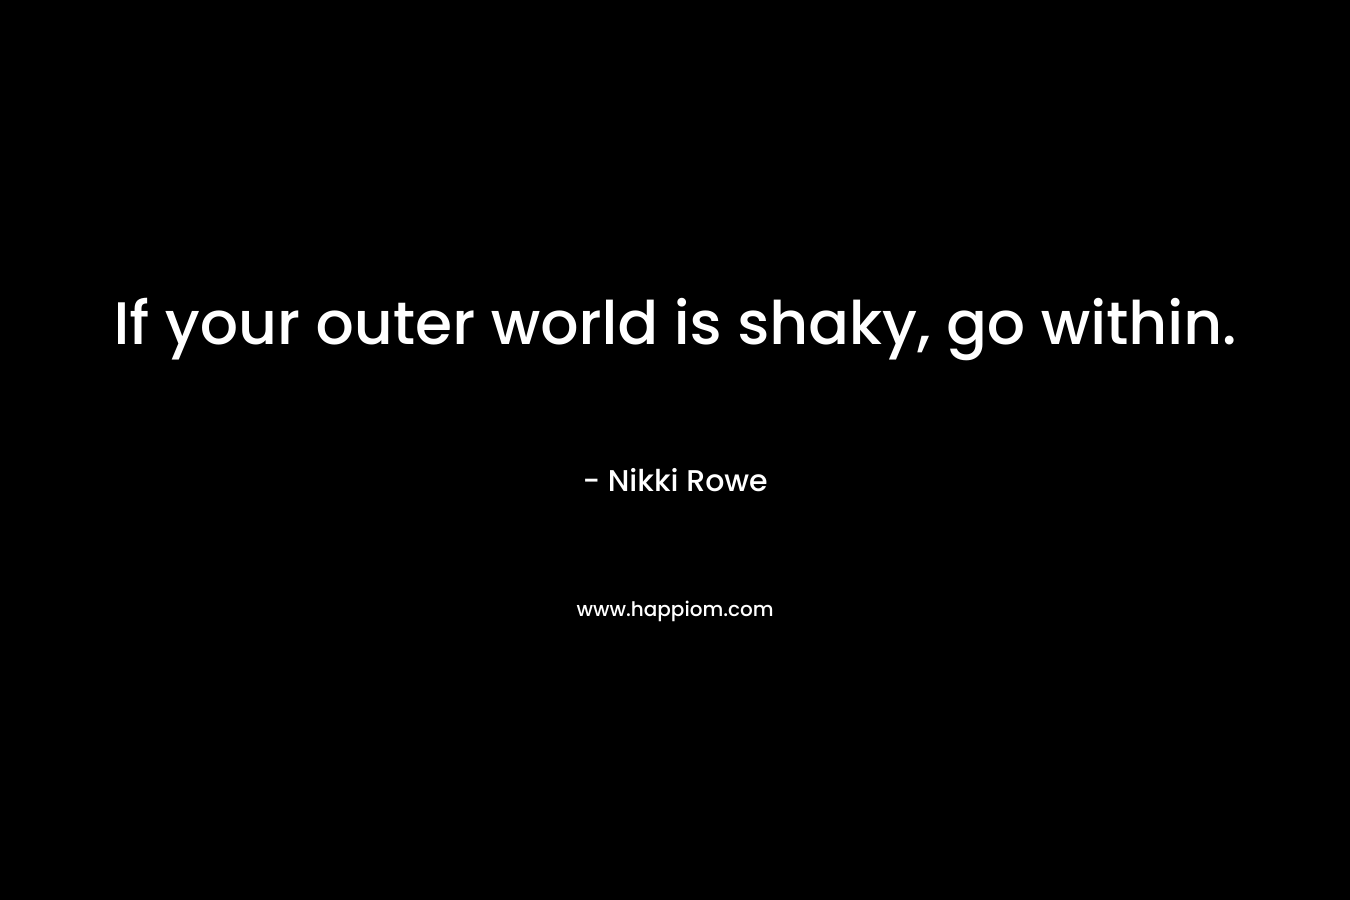 If your outer world is shaky, go within.